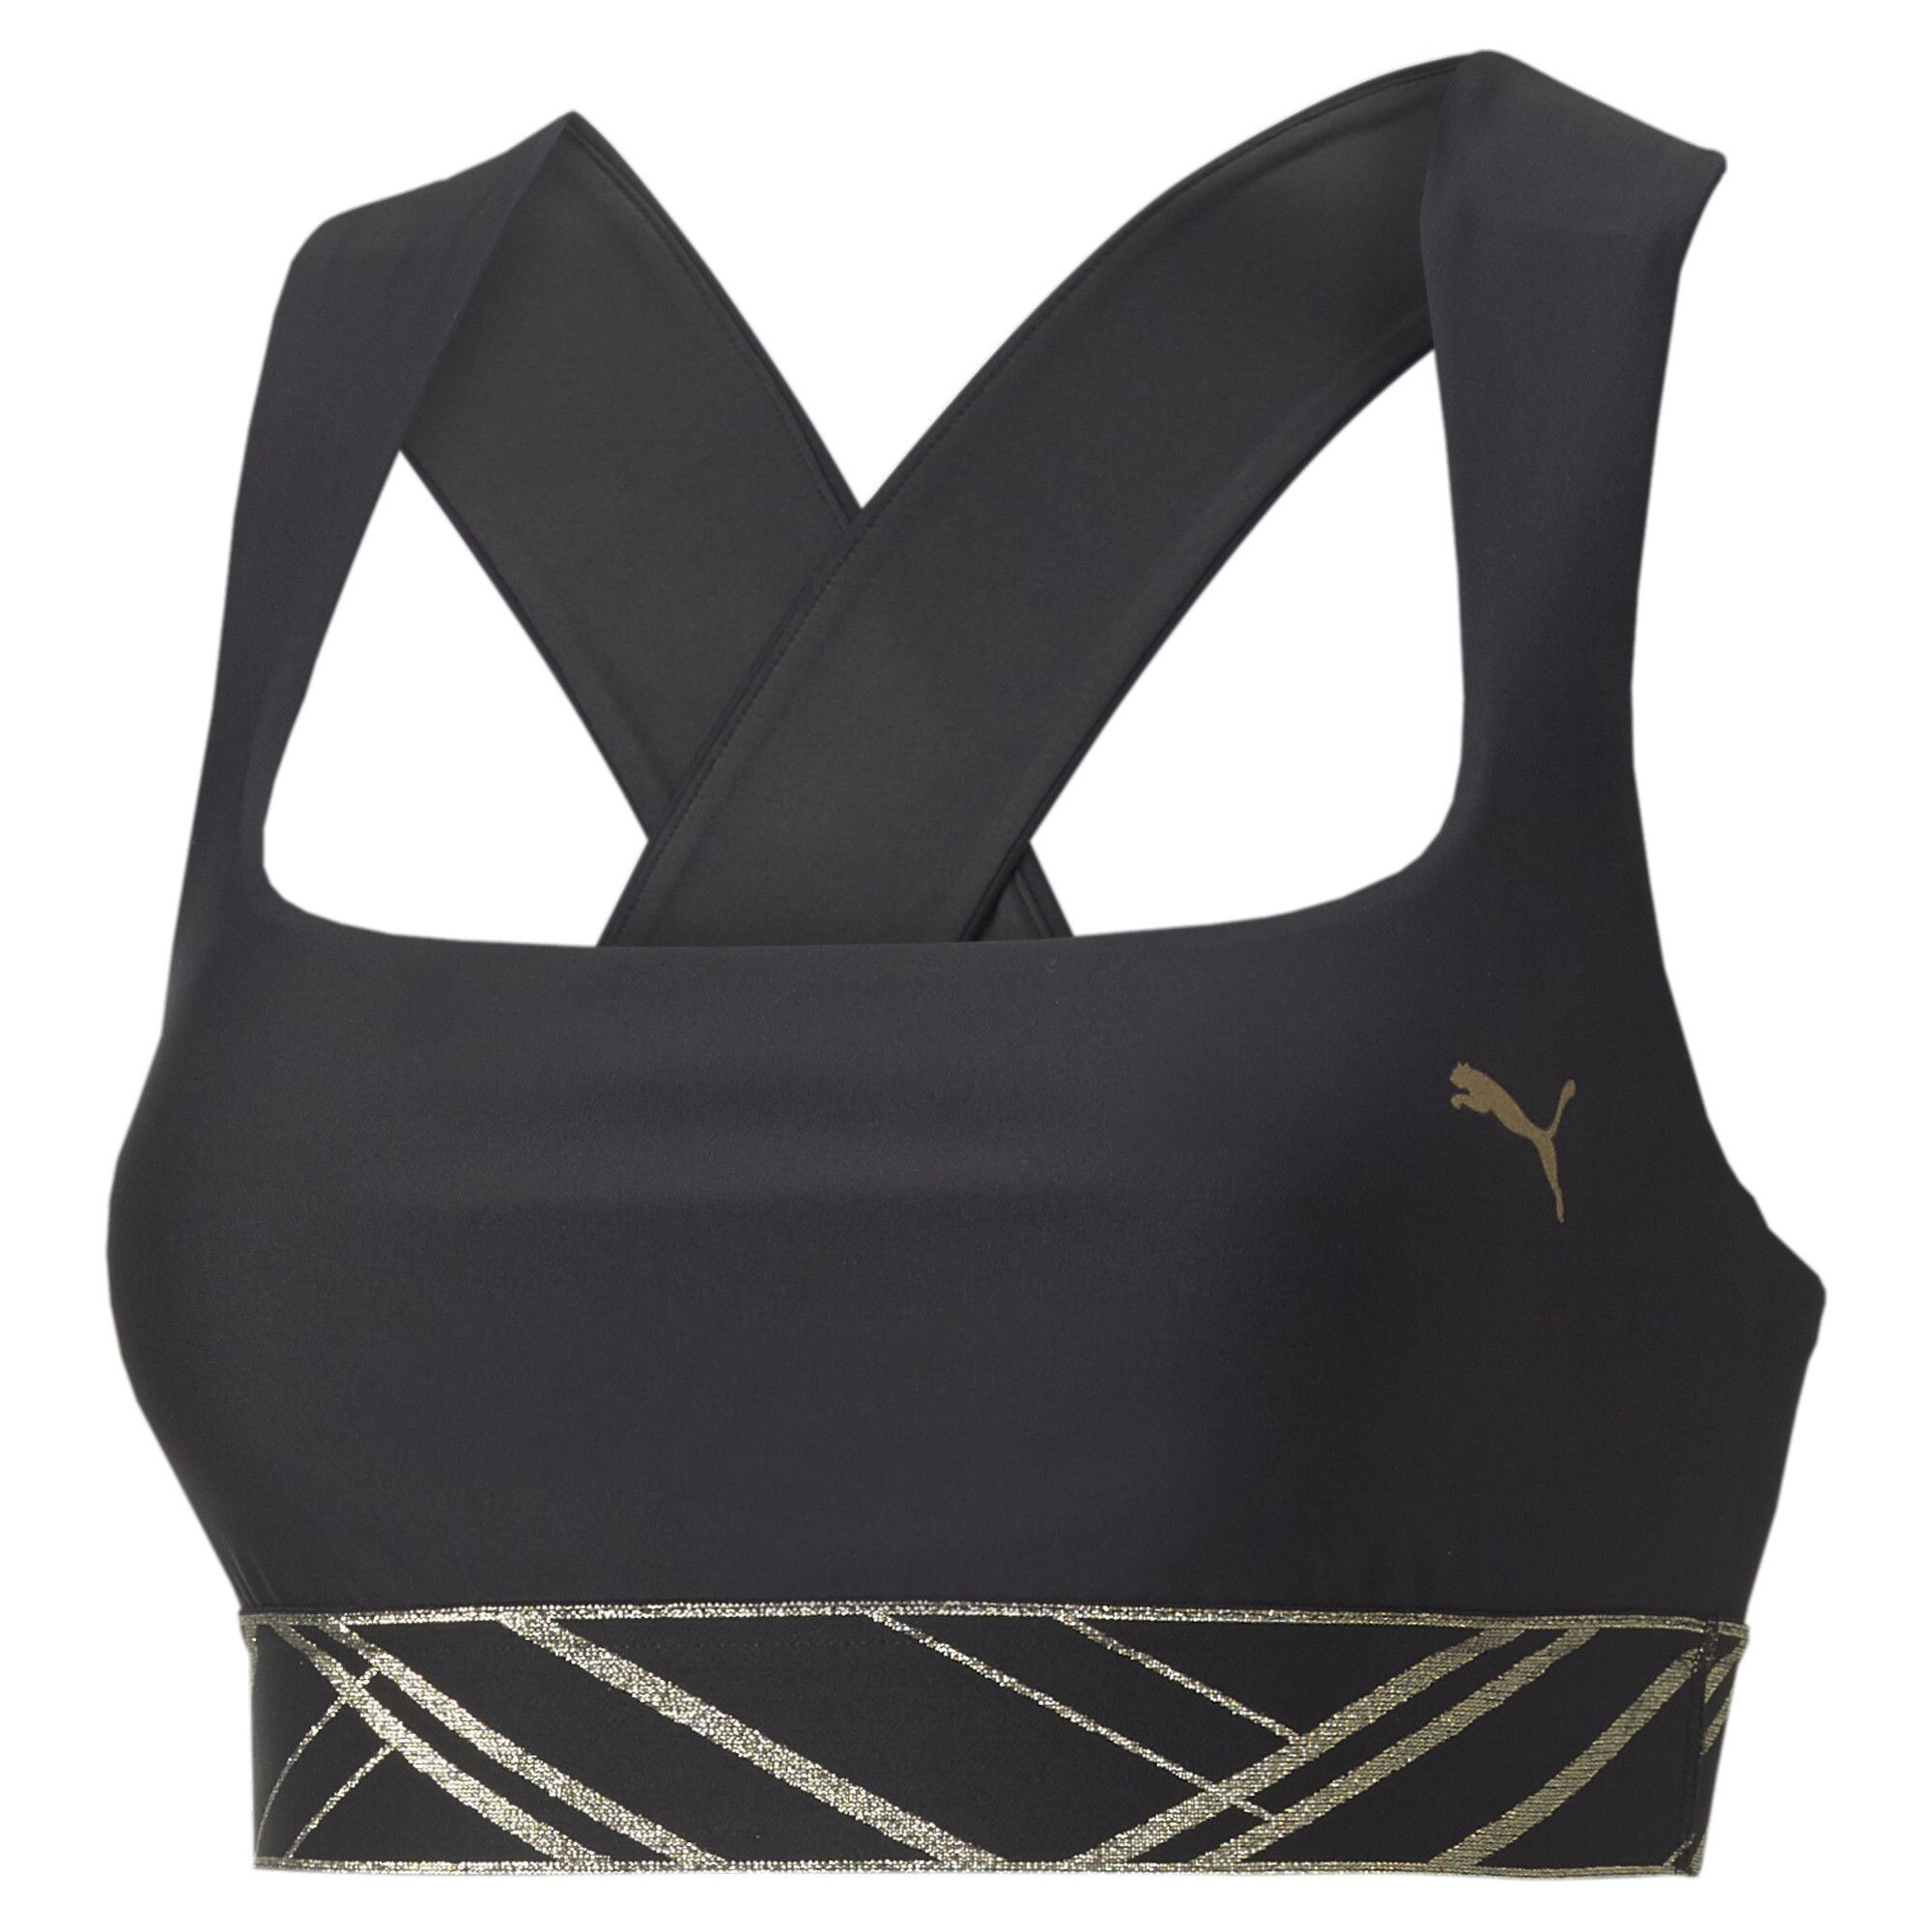 PRODUCT STORY Athletic yet edgy, with comfortable compression to keep you supported through high and low impact sports, our Deco Glam Bra is a must-have for women on the move. Featuring thick, crisscrossing straps, standout graphics, and dryCELL moisture-technology to keep you cool and comfortable as the action intensifies, you'll be dressed for both style and success. FEATURES & BENEFITS : Midori: Made with the bio-based finishing treatment miDori® bioWick dryCELL: Performance technology designed to wick moisture from the body and keep you free of sweat during exercise DETAILS : Mid impact support for versatile workouts Removable pads for a customisable fit Crisscrossing straps PUMA Cat Logo on left chest